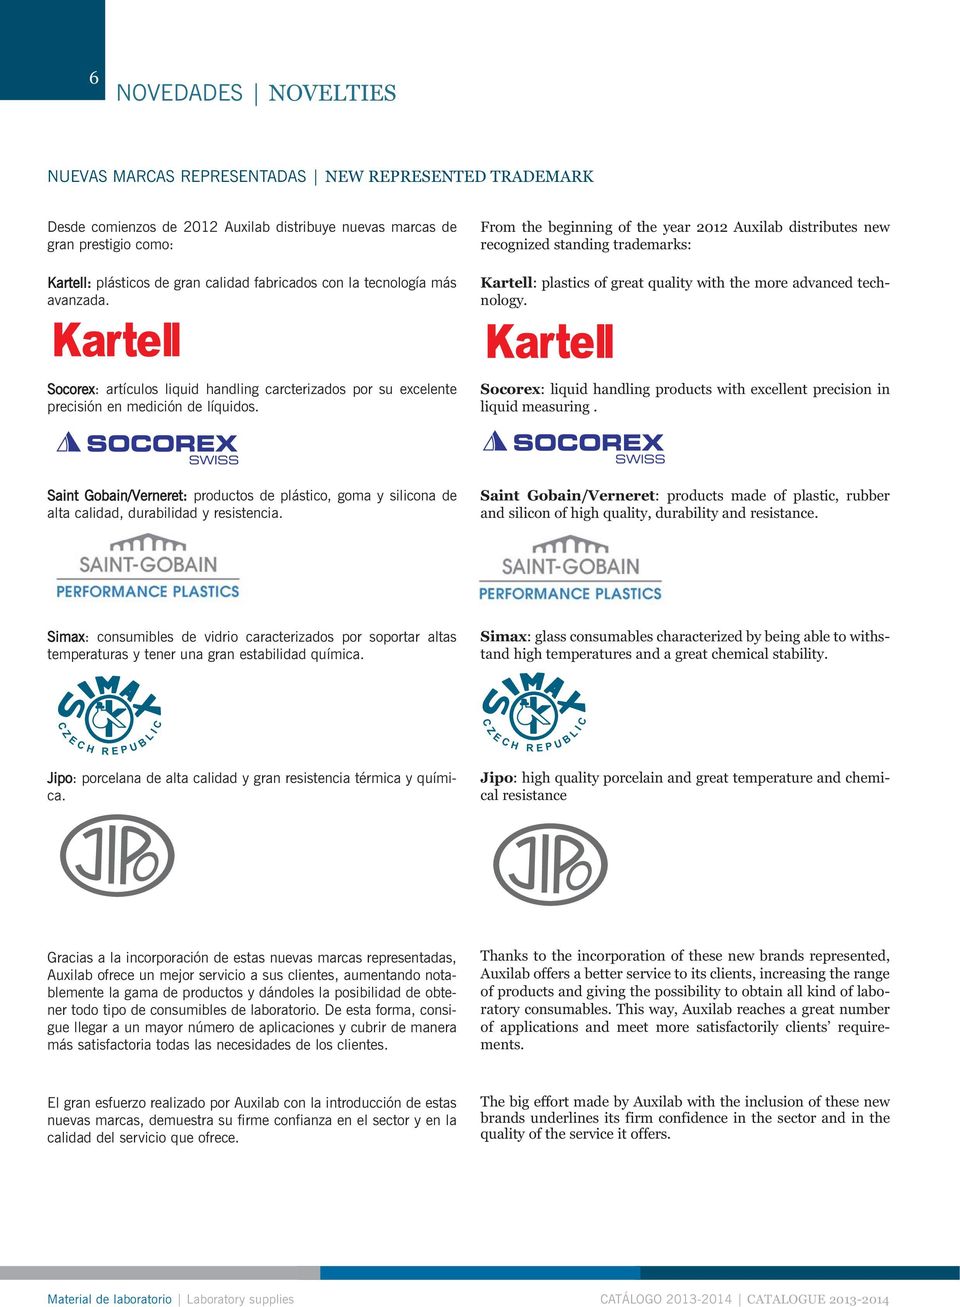 From the beginning of the year 2012 Auxilab distributes new recognized standing trademarks: Kartell: plastics of great quality with the more advanced technology.